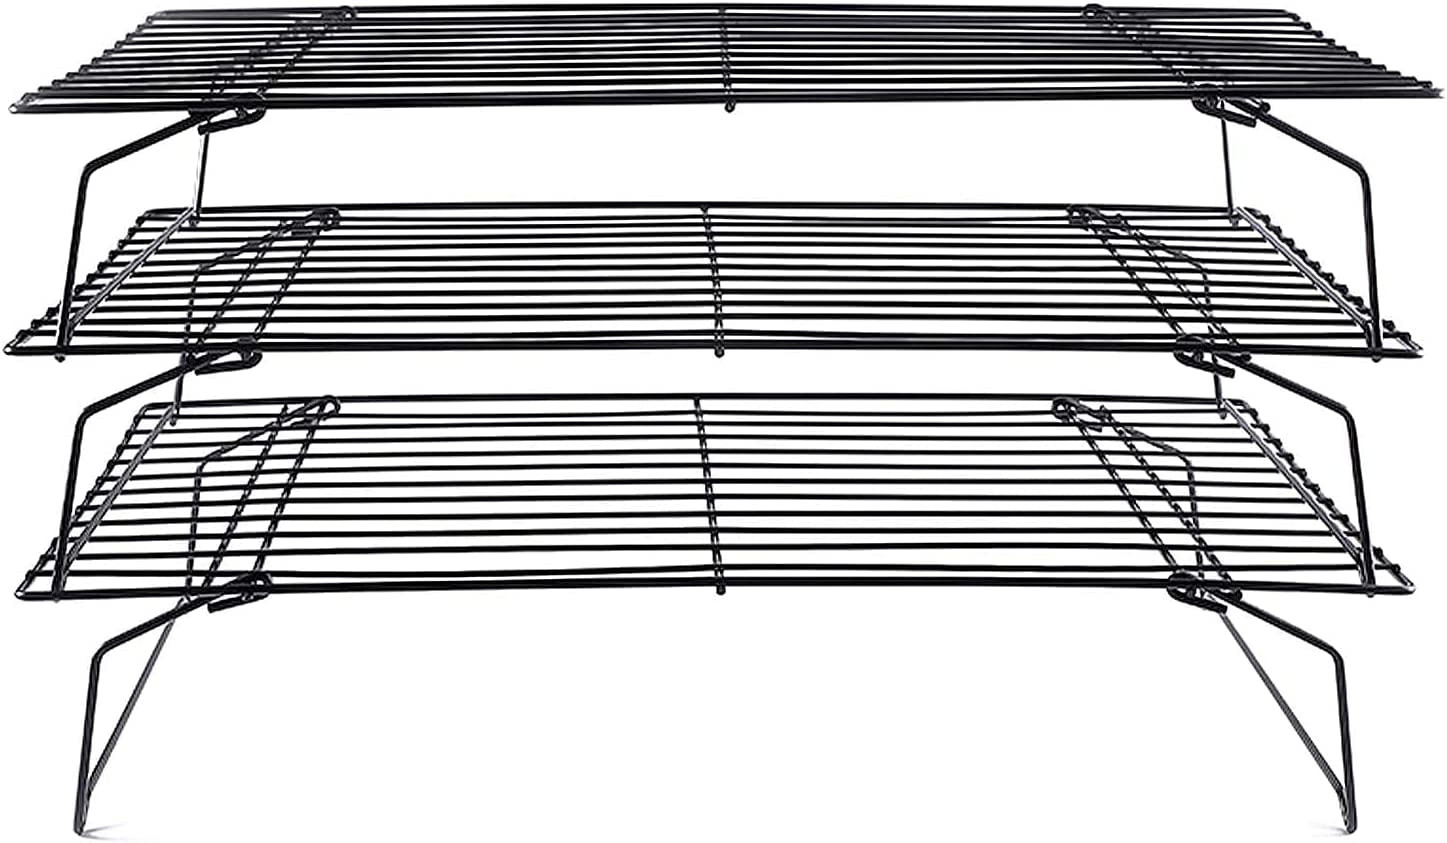 Duslogis Cooling Rack, 3-Tier Stainless Steel Stackable Baking